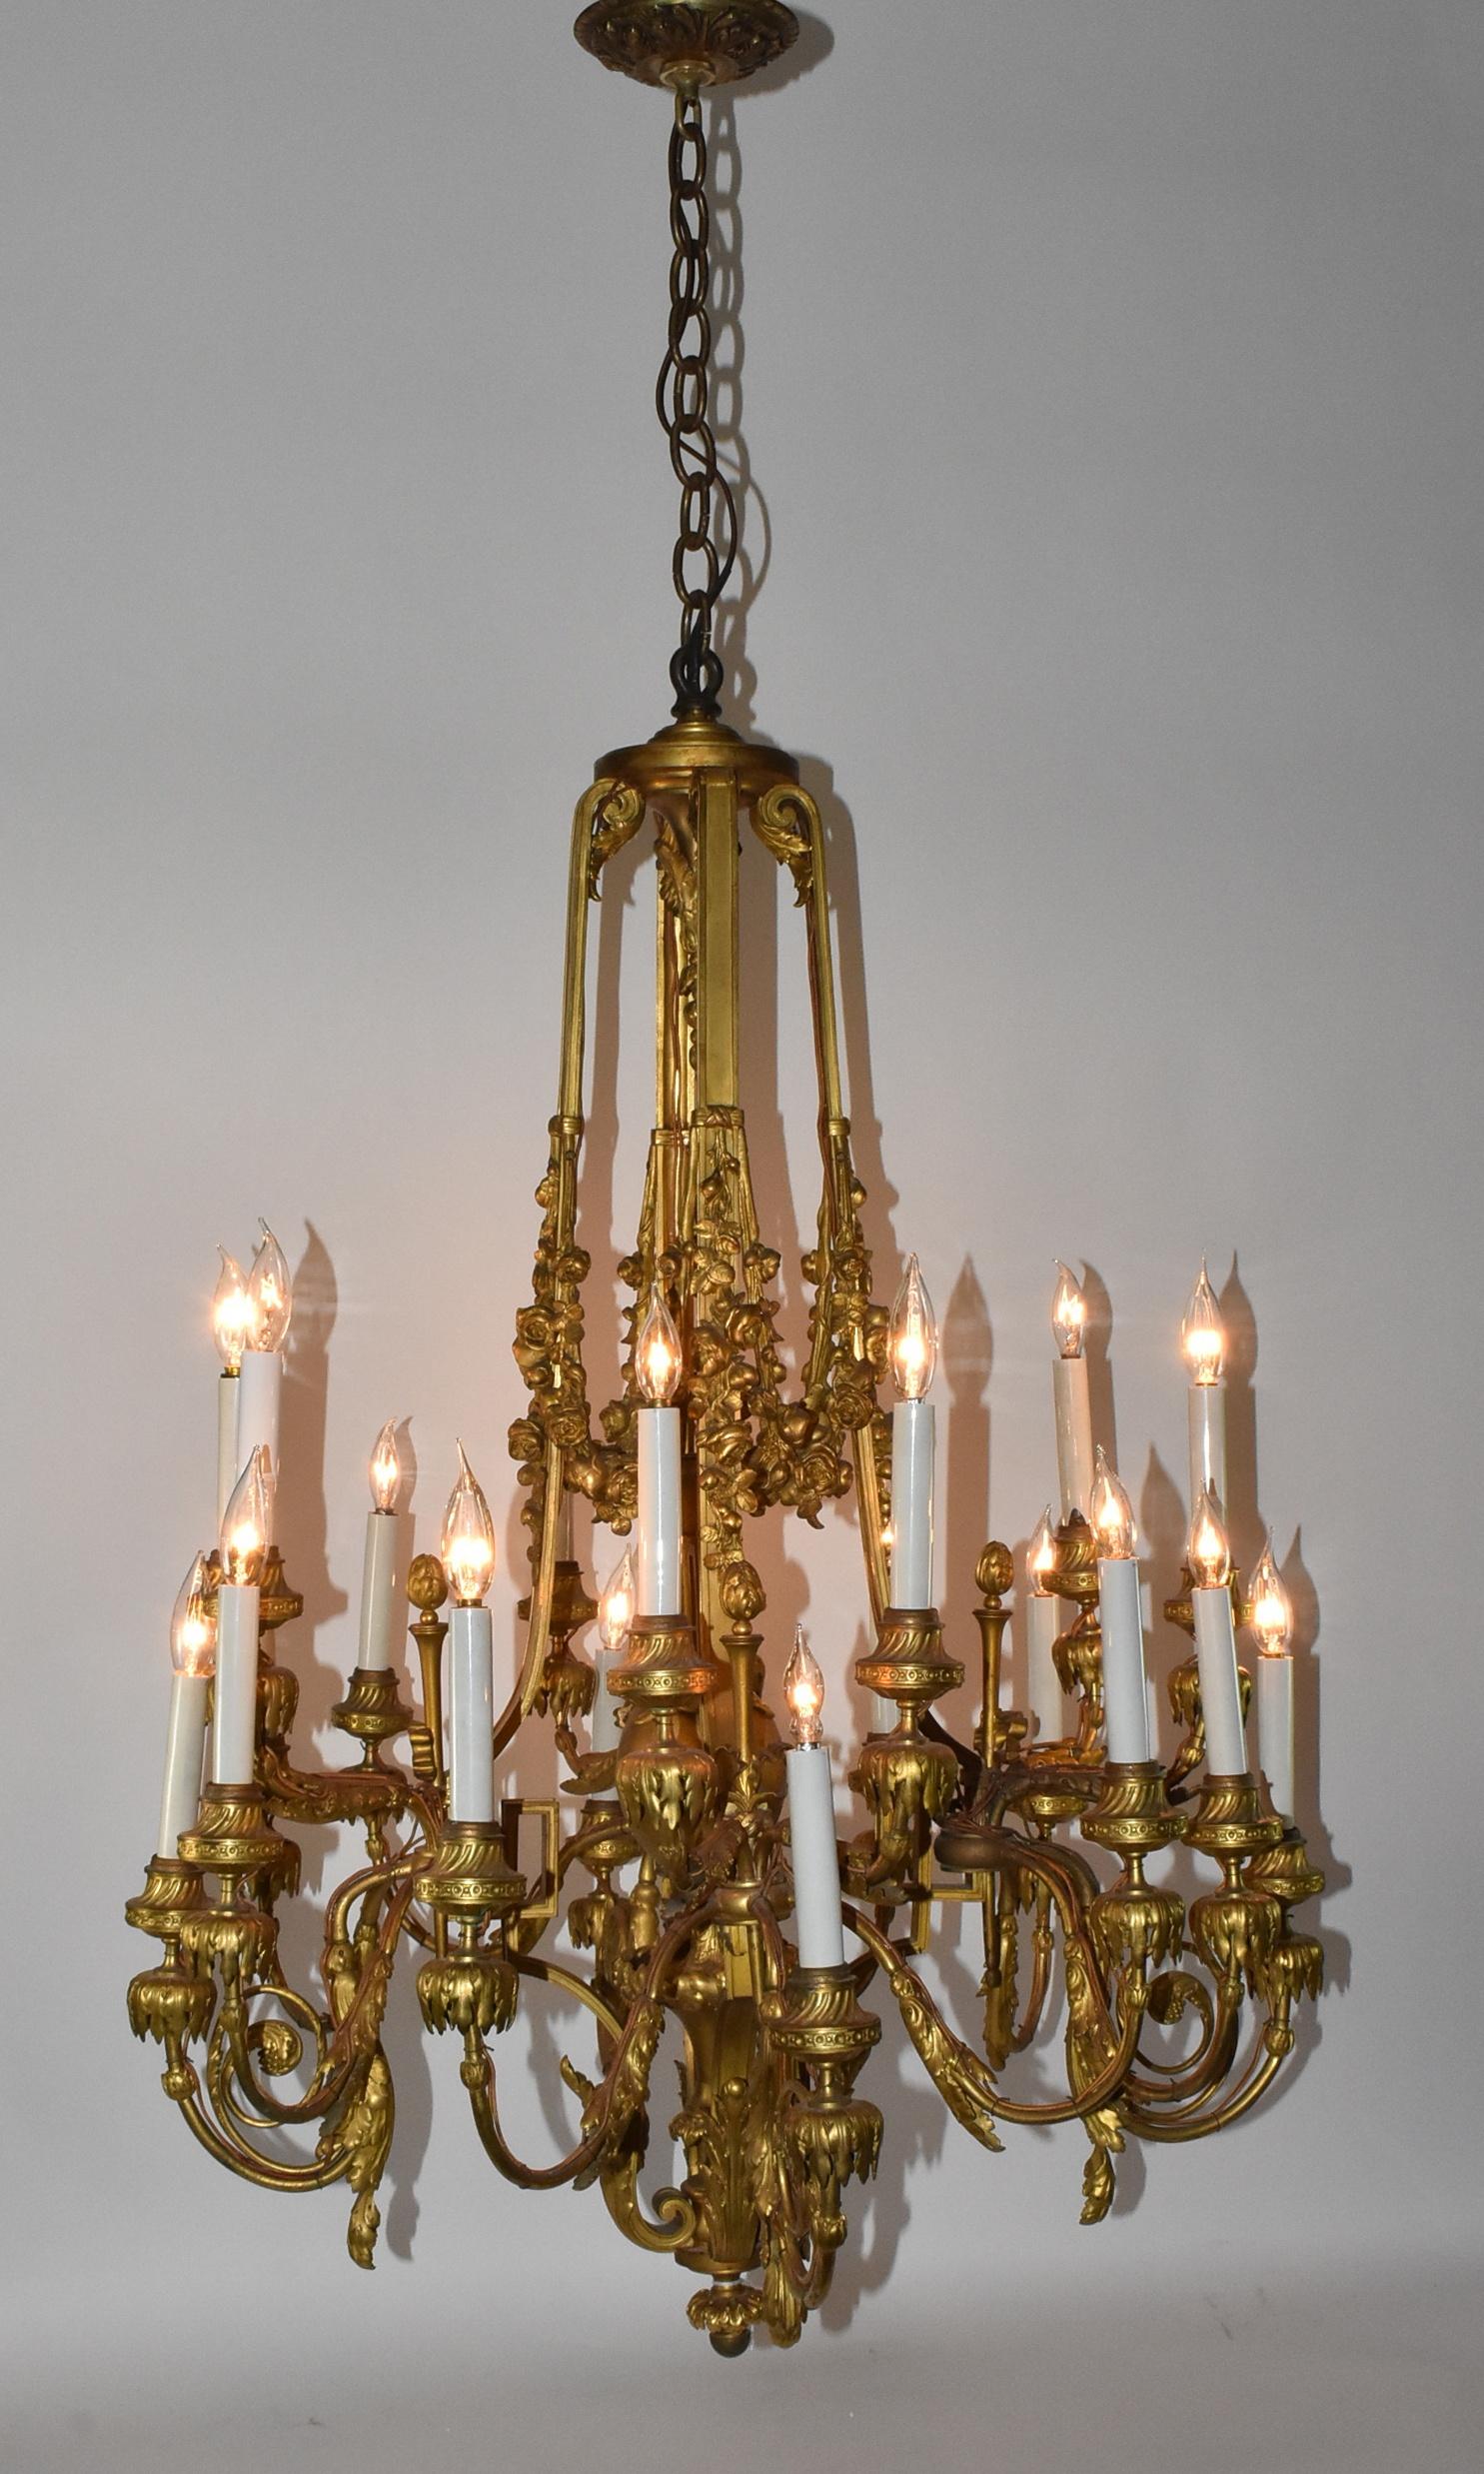 Patinated bronze ormolu twenty light chandelier. Converted from a candle fixture. Four scrolled arms with decorative torch detail. Center two handled urn surrounded by draped swags of roses. Dimensions: 52